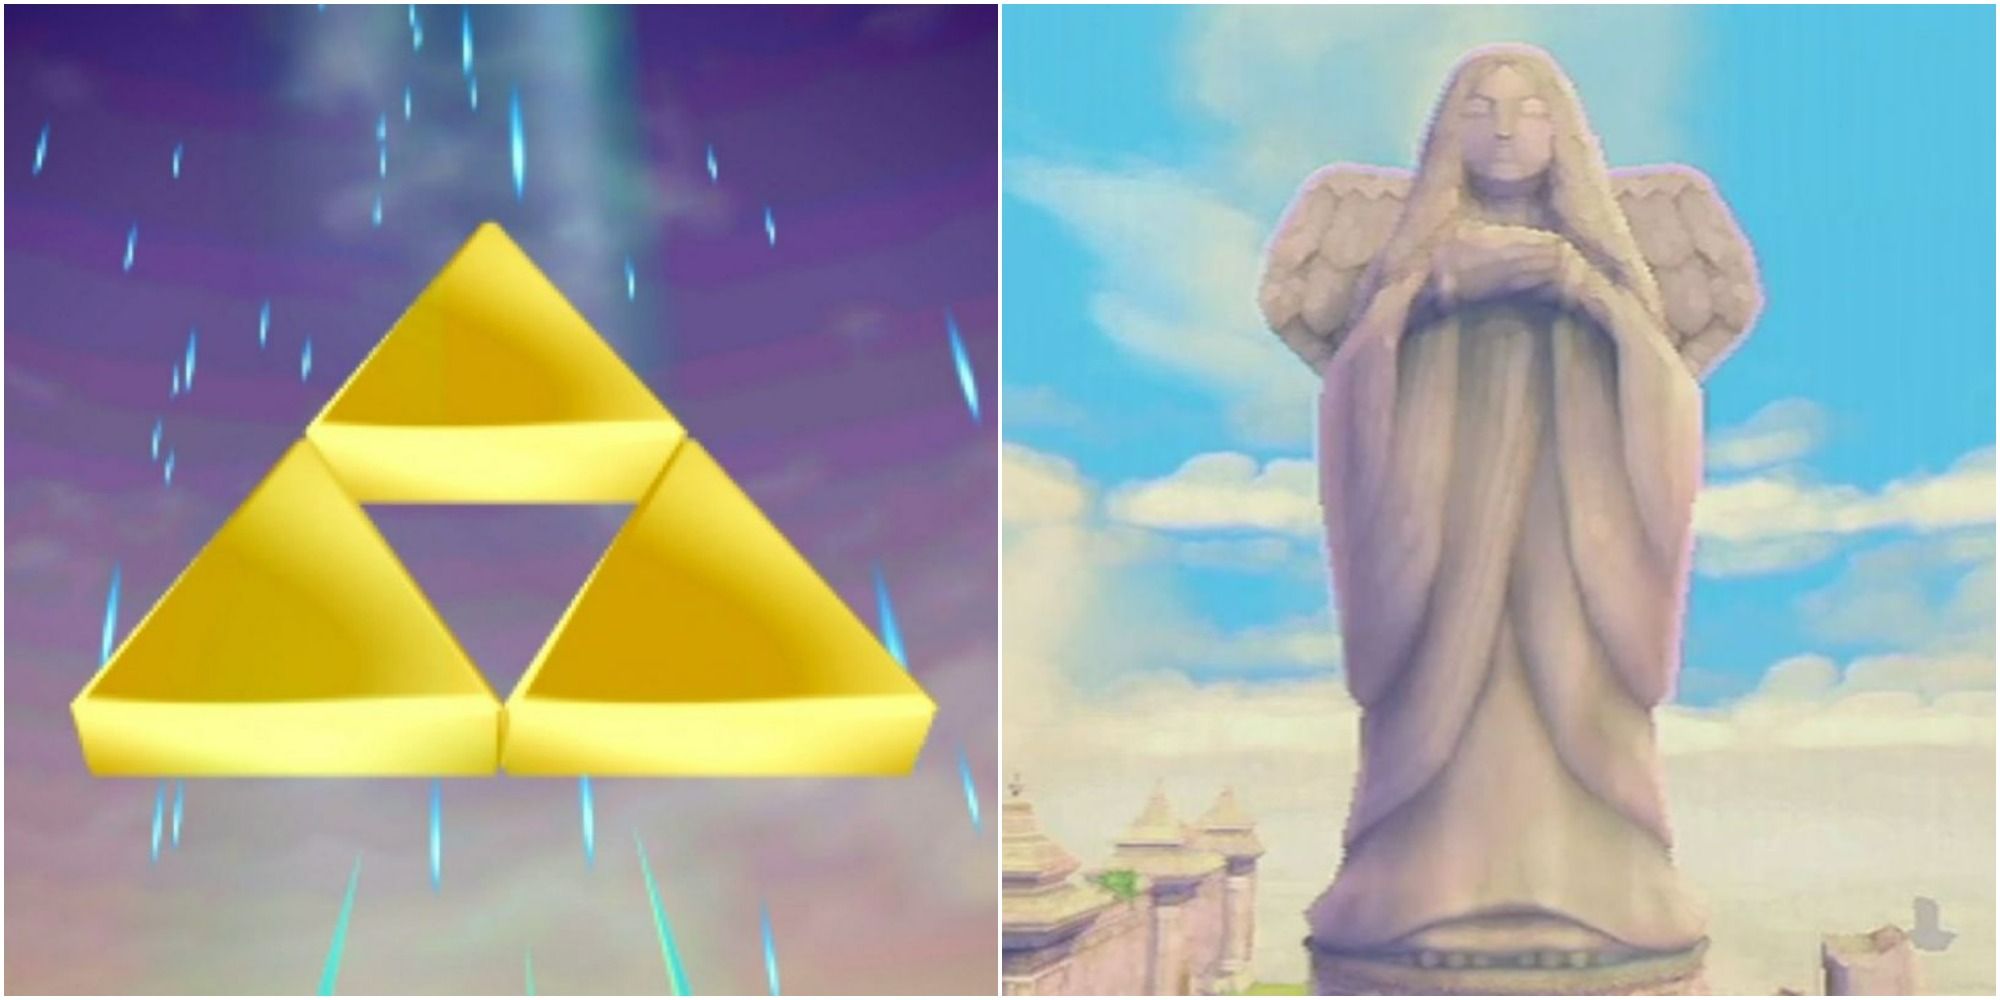 The Triforce and the Goddess Hylia